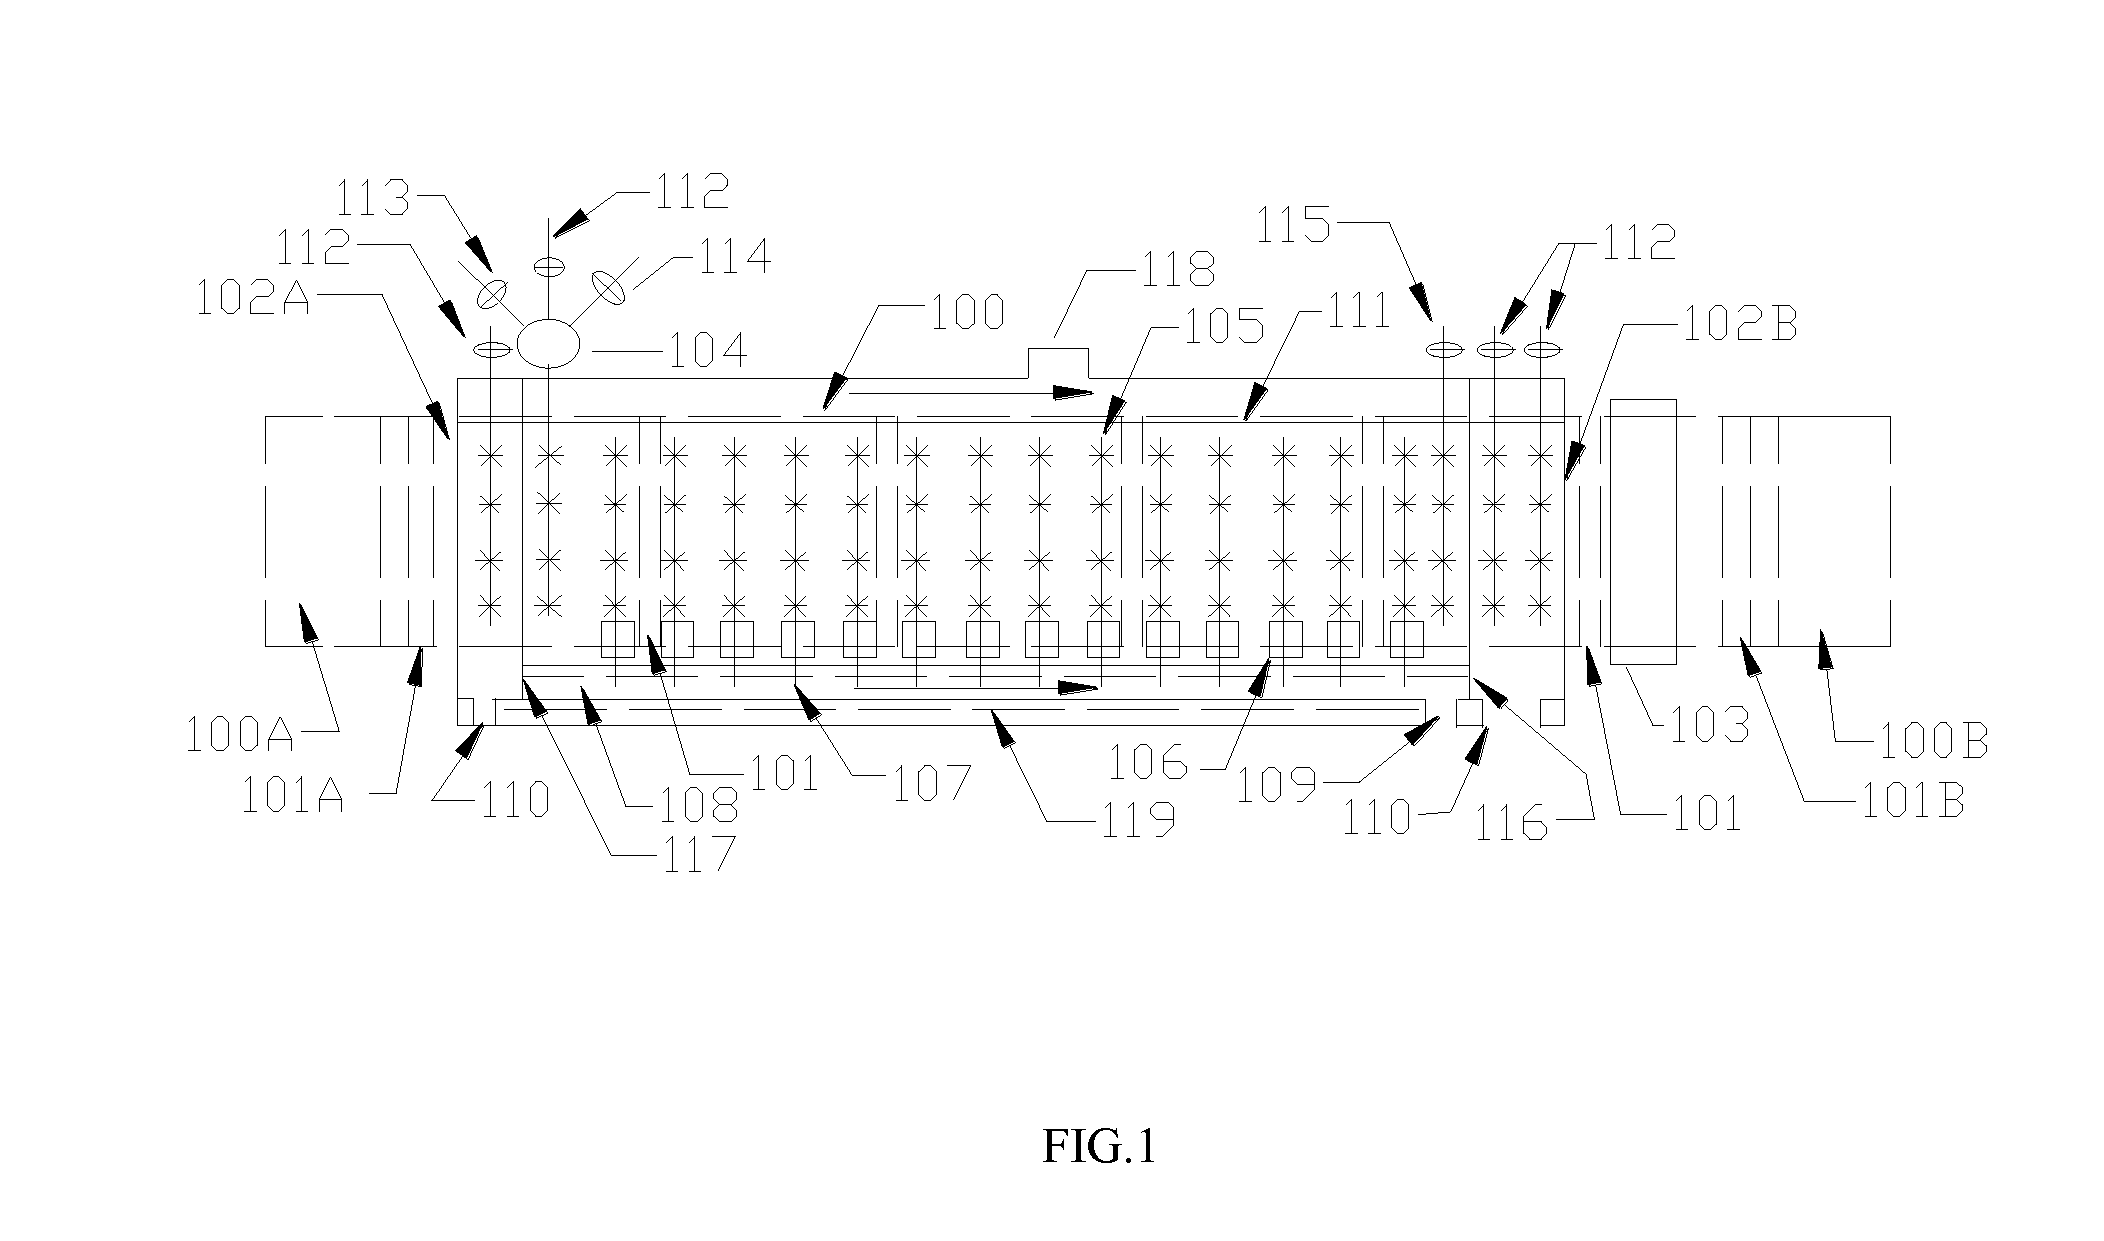 Chemical Bath Deposition Apparatus for Fabrication of Semiconductor Films through Roll-to-Roll Processes